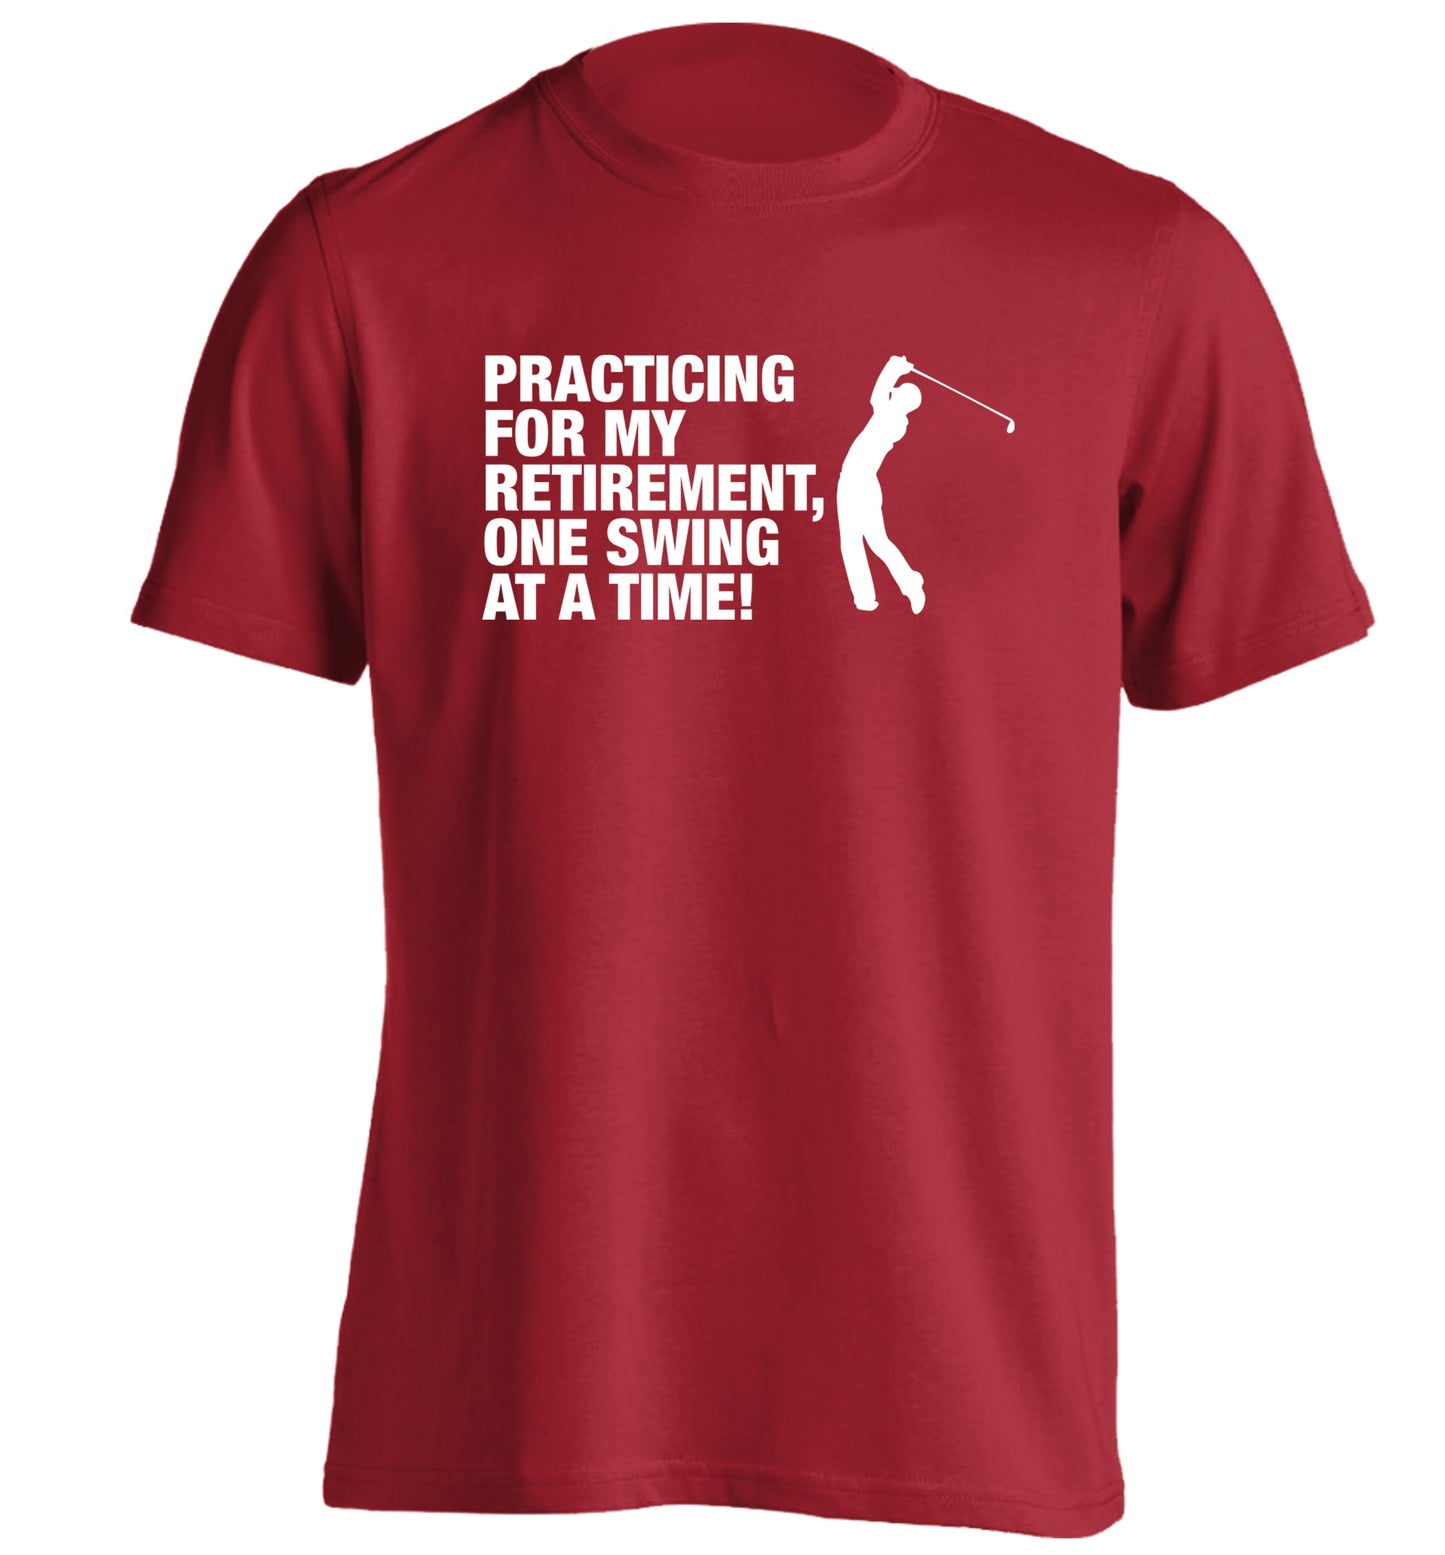 Practicing for my retirement one swing at a time adults unisex red Tshirt 2XL